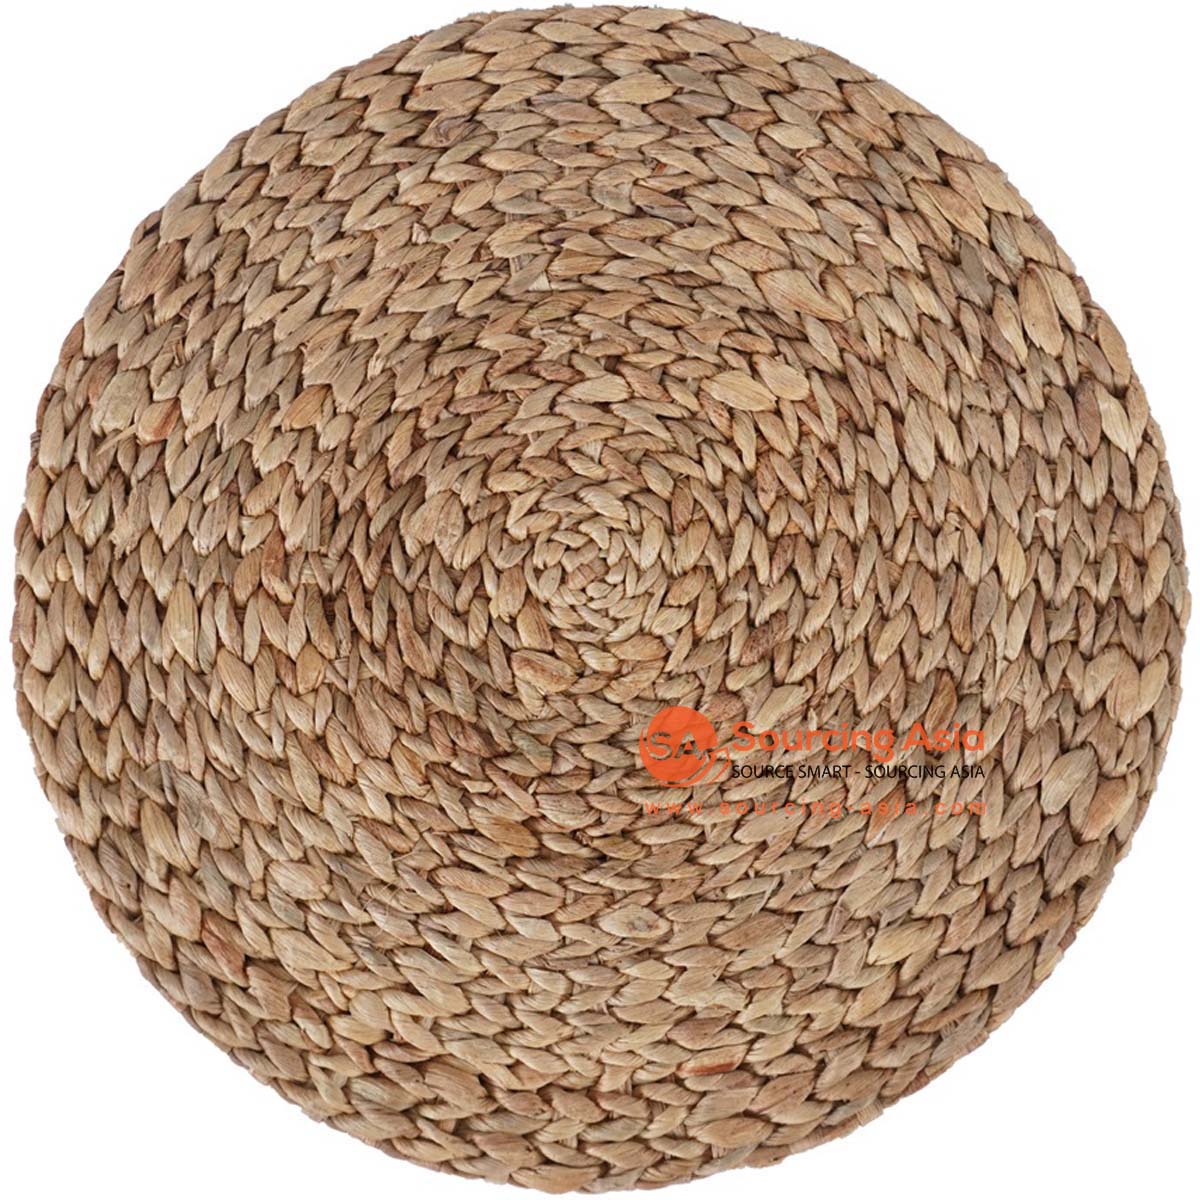 HBSC579 NATURAL WATER HYACINTH ROUND PLACEMAT